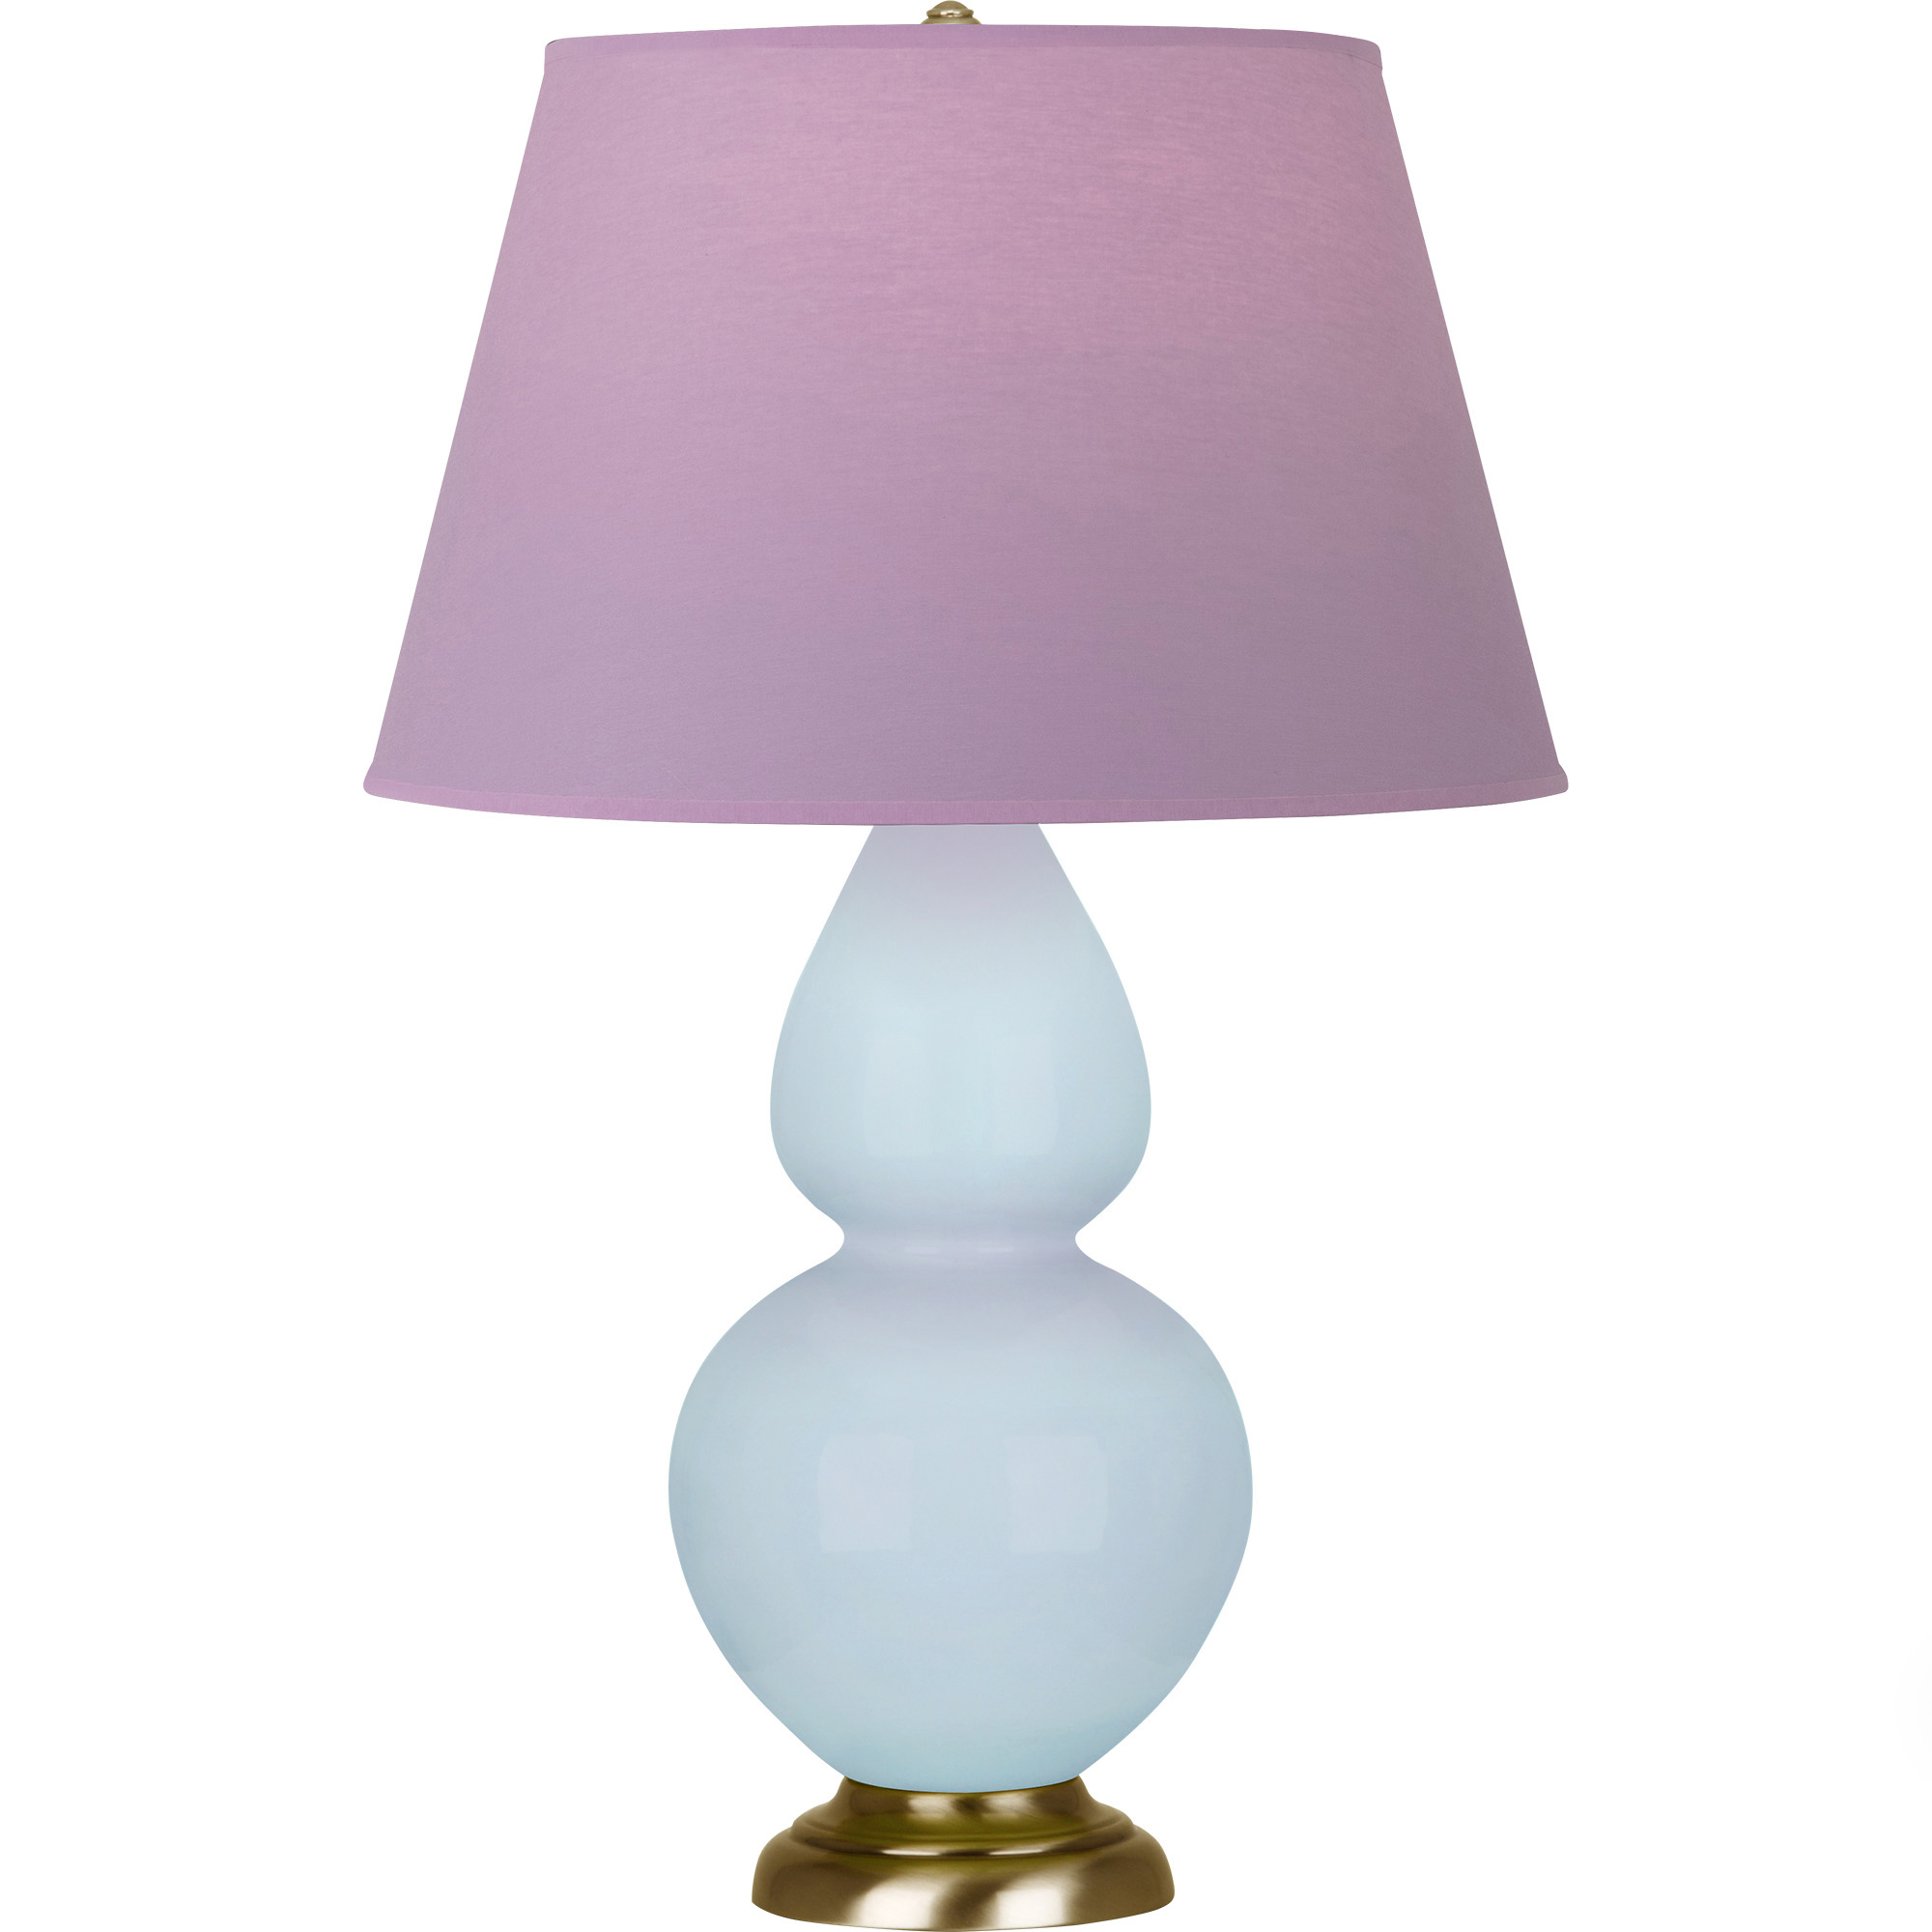 Double Gourd Table Lamp Style #1666L